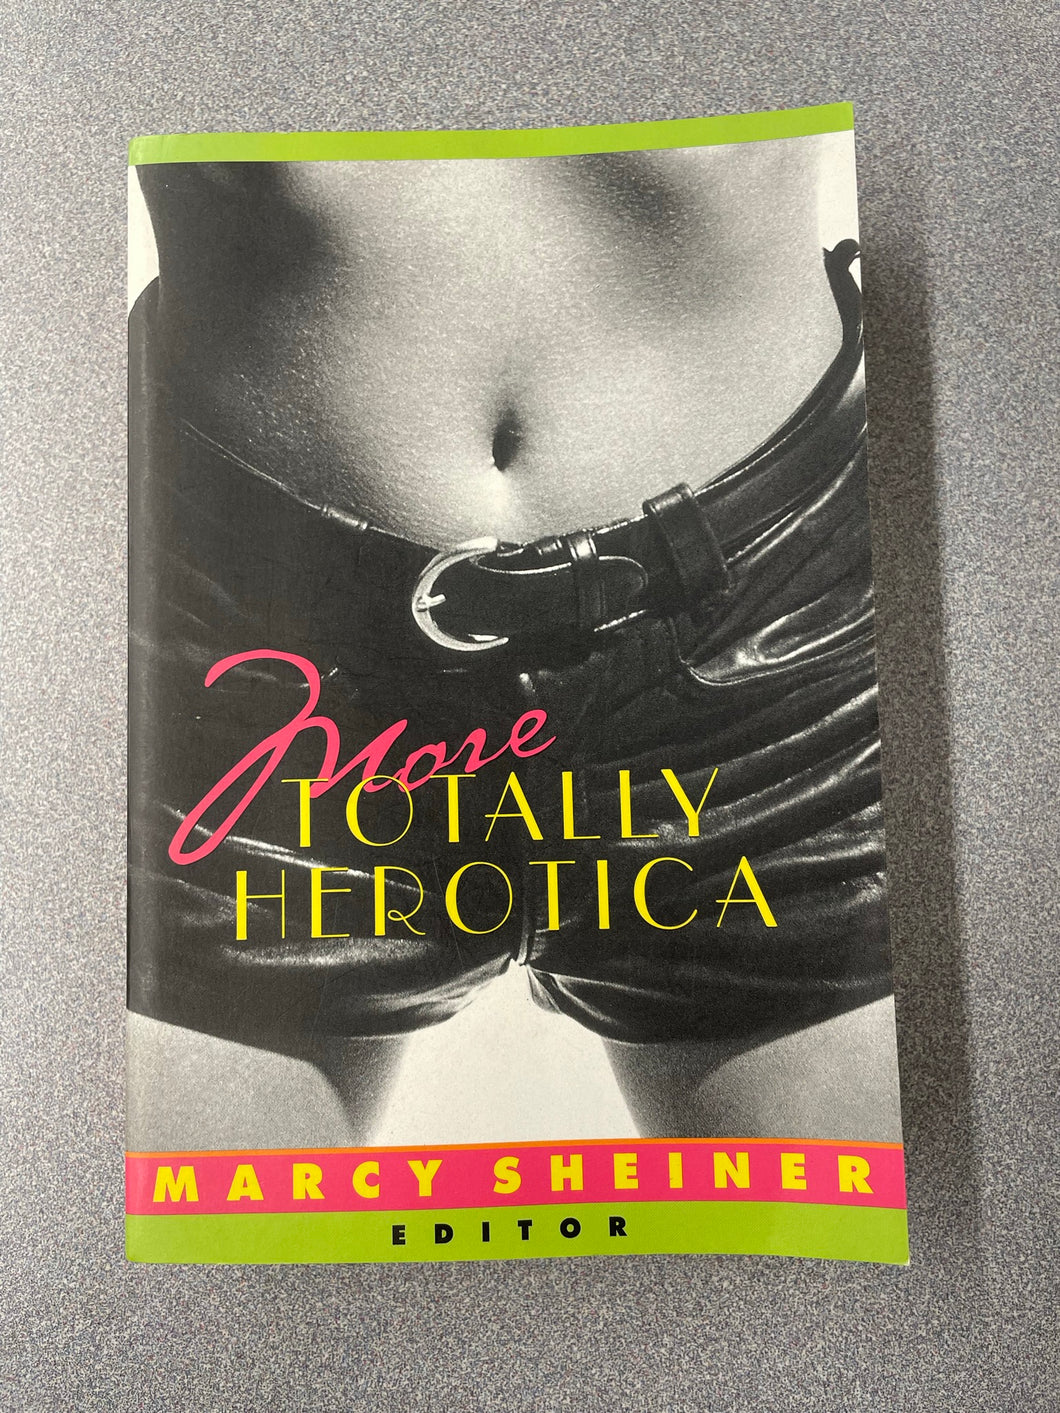 More Totally Herotica: A Collection of Women's Erotic Fiction, Sheiner, Marcy, ed., [1999] ER 7/23